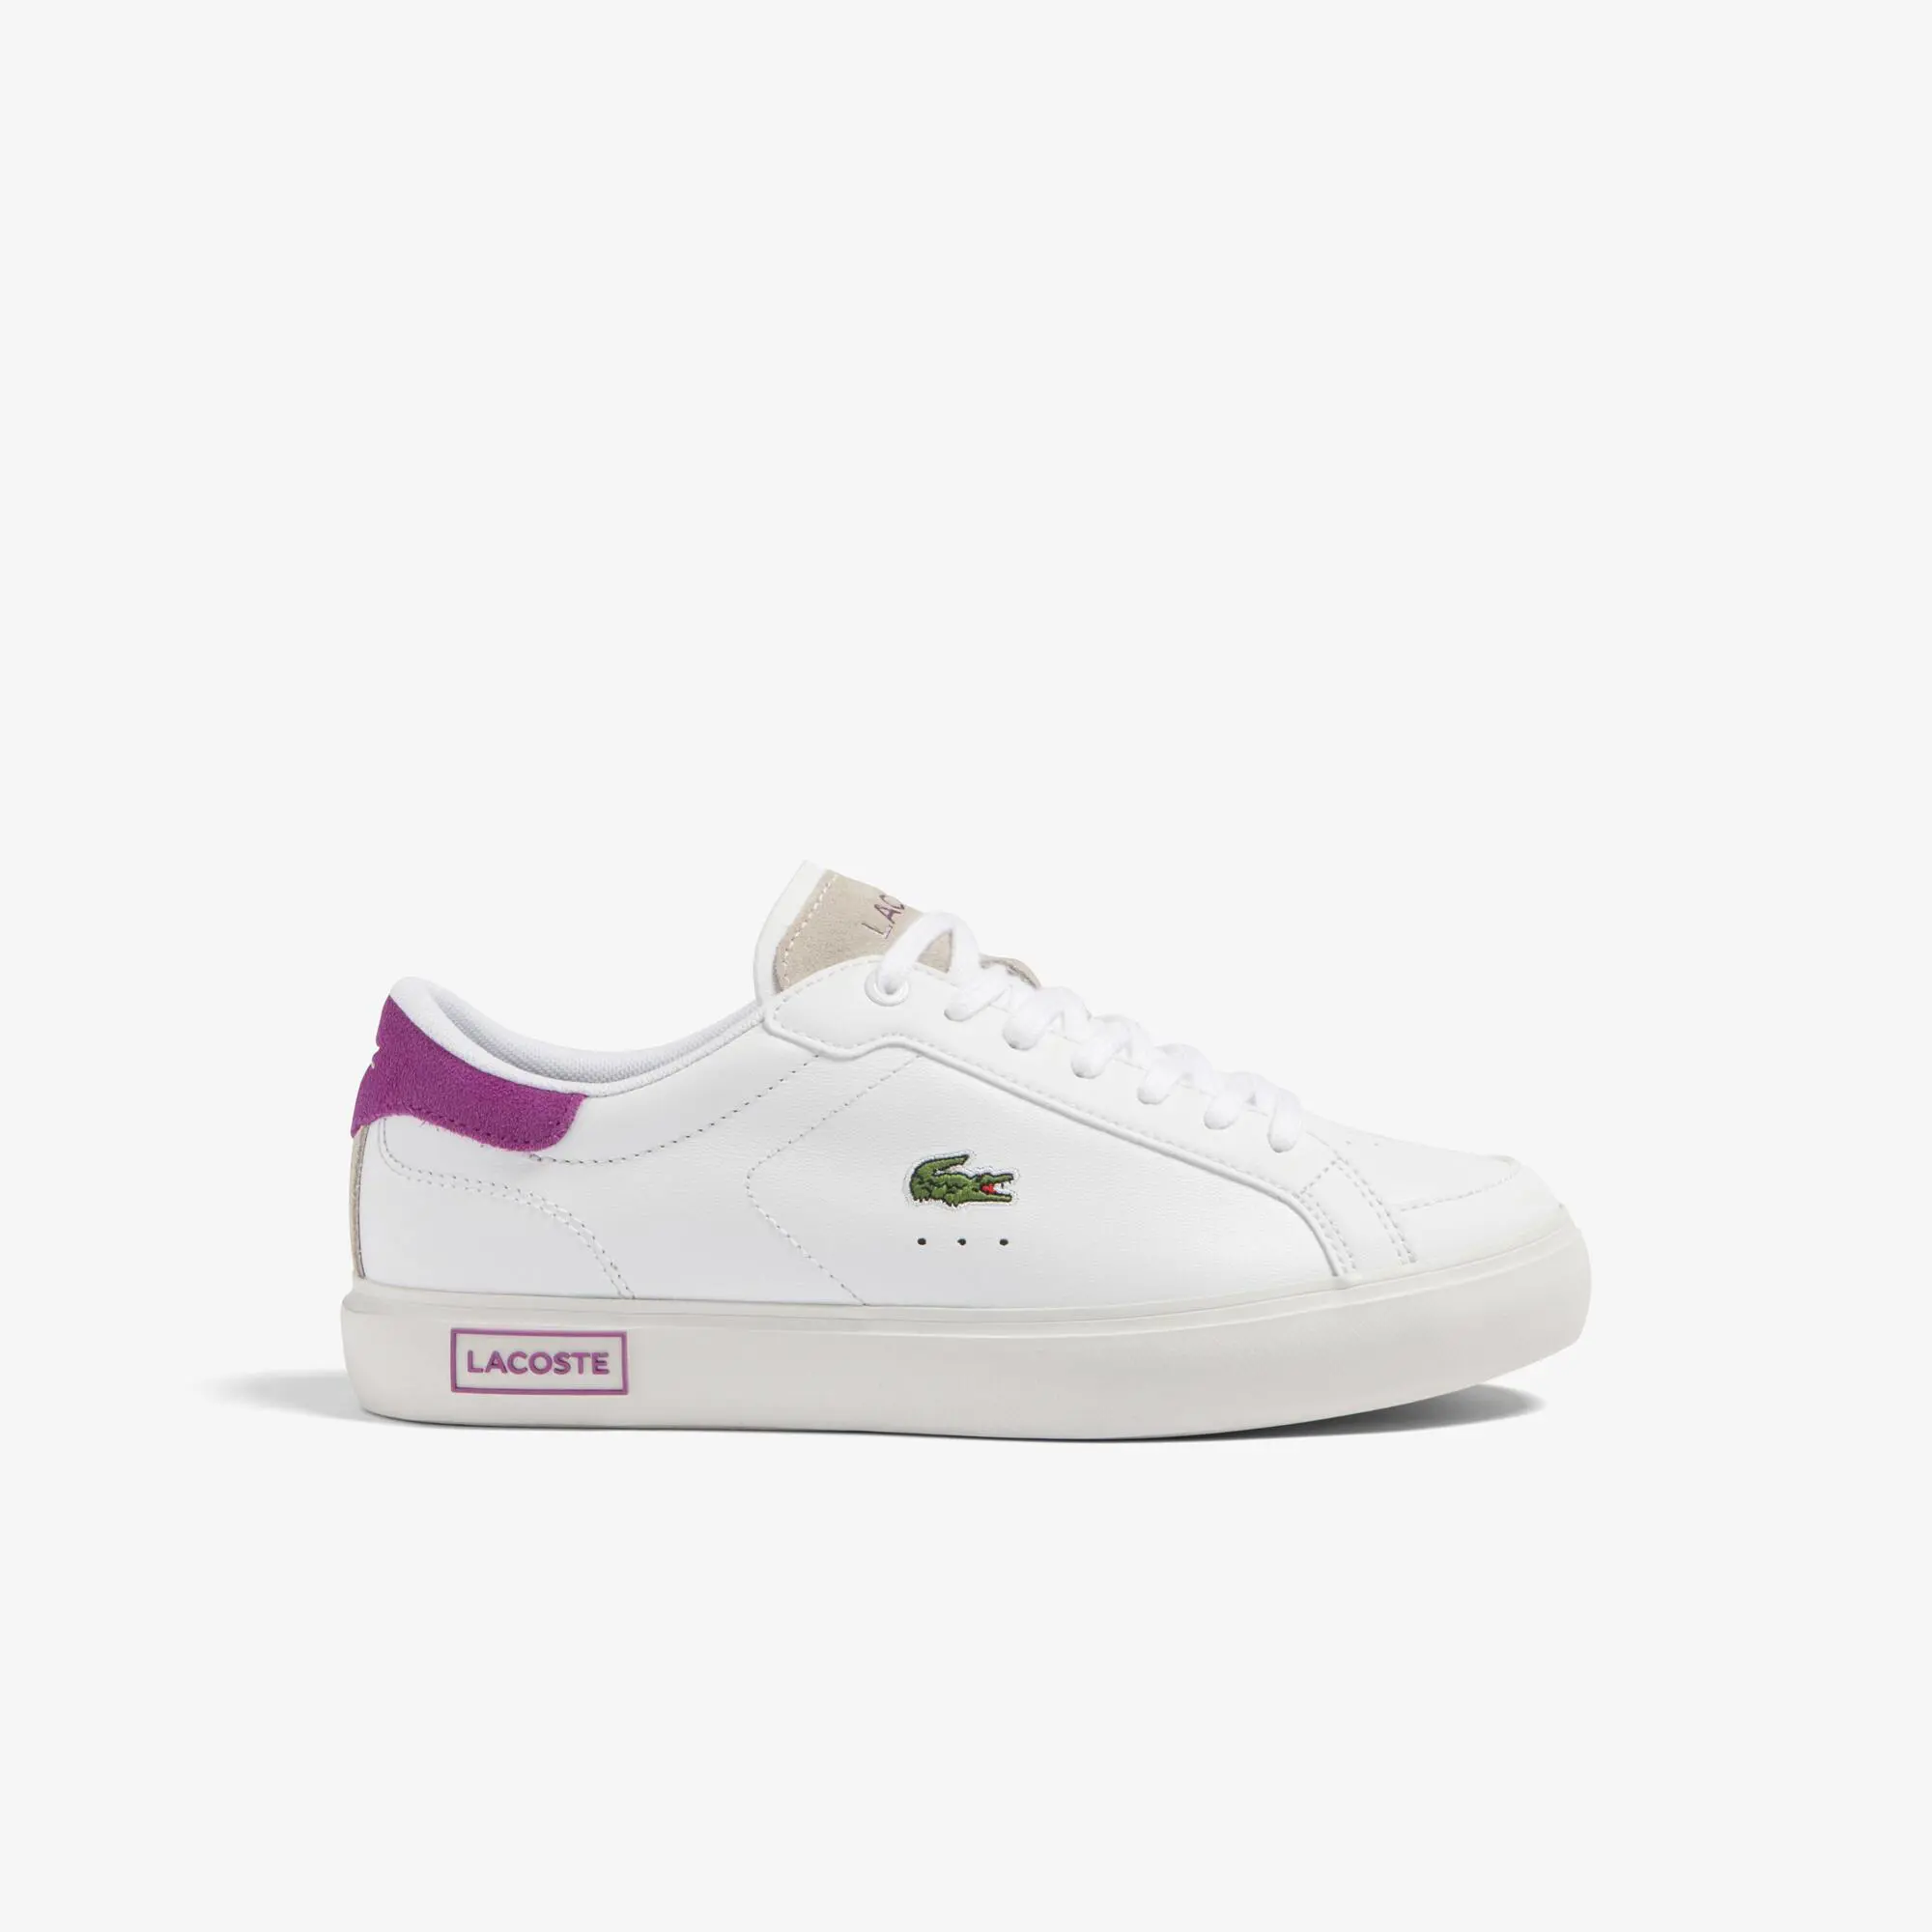 Lacoste Women's Lacoste Powercourt Leather Trainers. 1